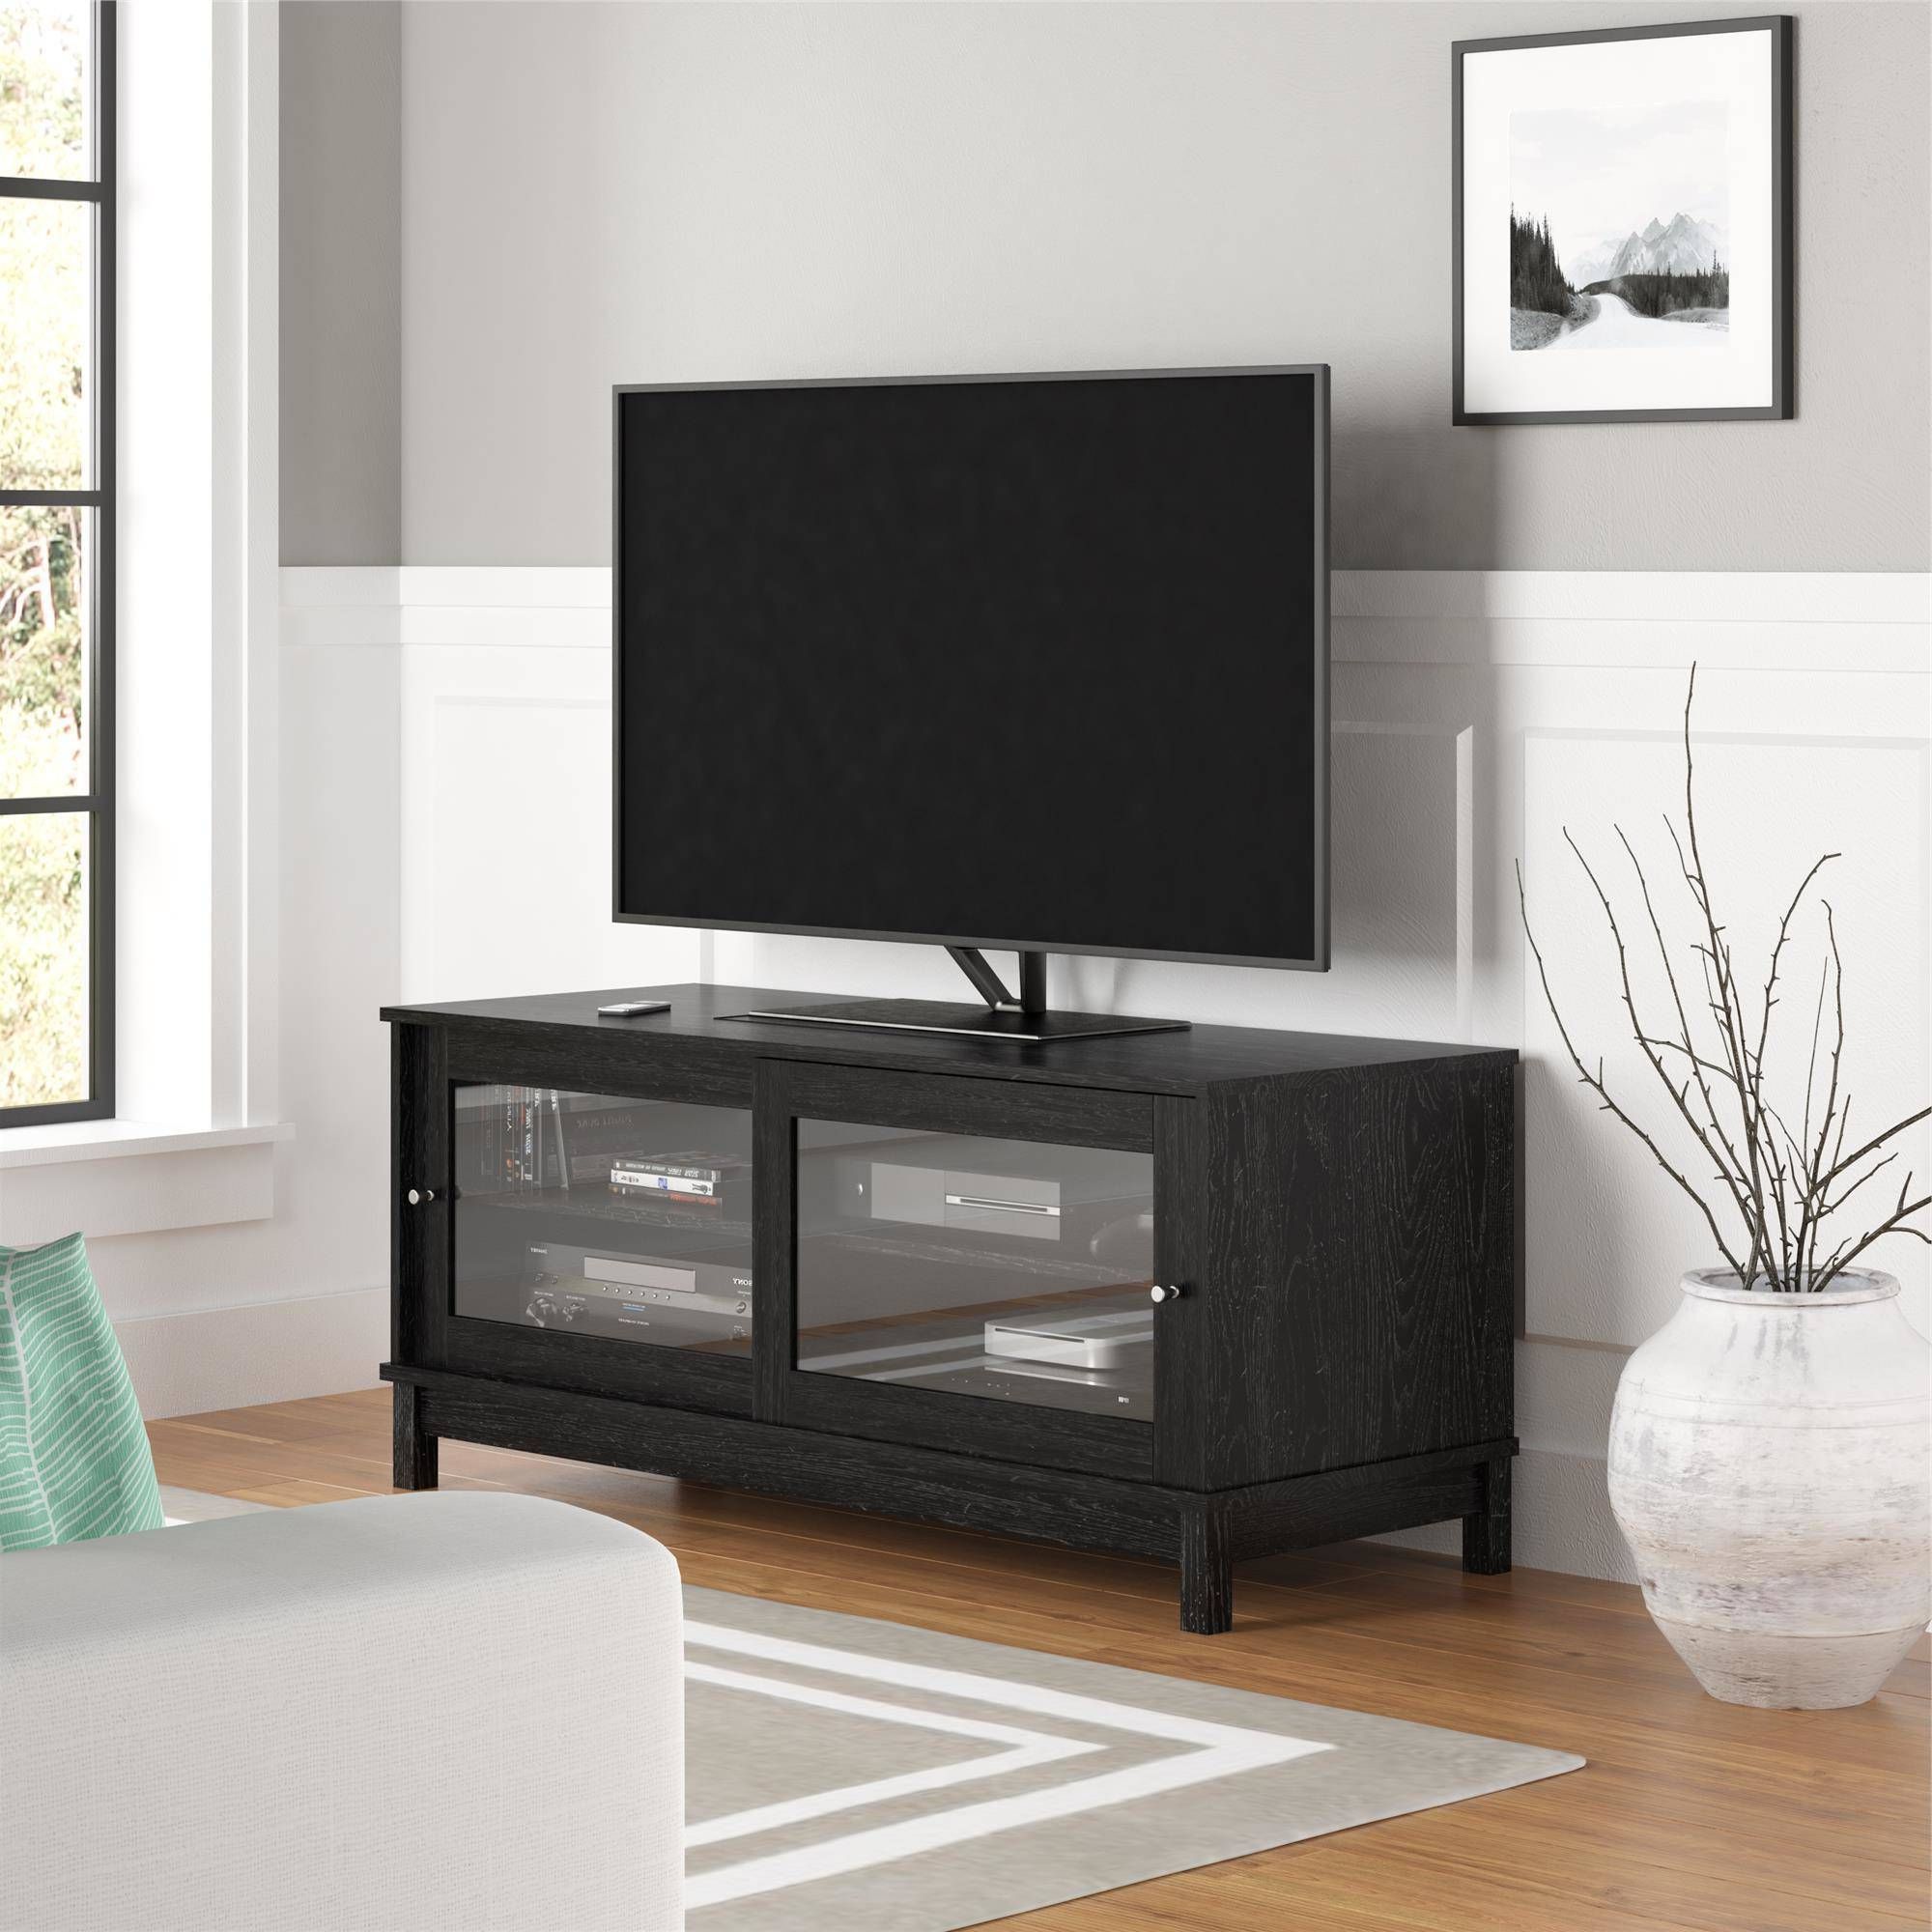 Home Entertainment Center Tv Stand Media Storage With Throughout Petter Tv Media Stands (Gallery 15 of 20)